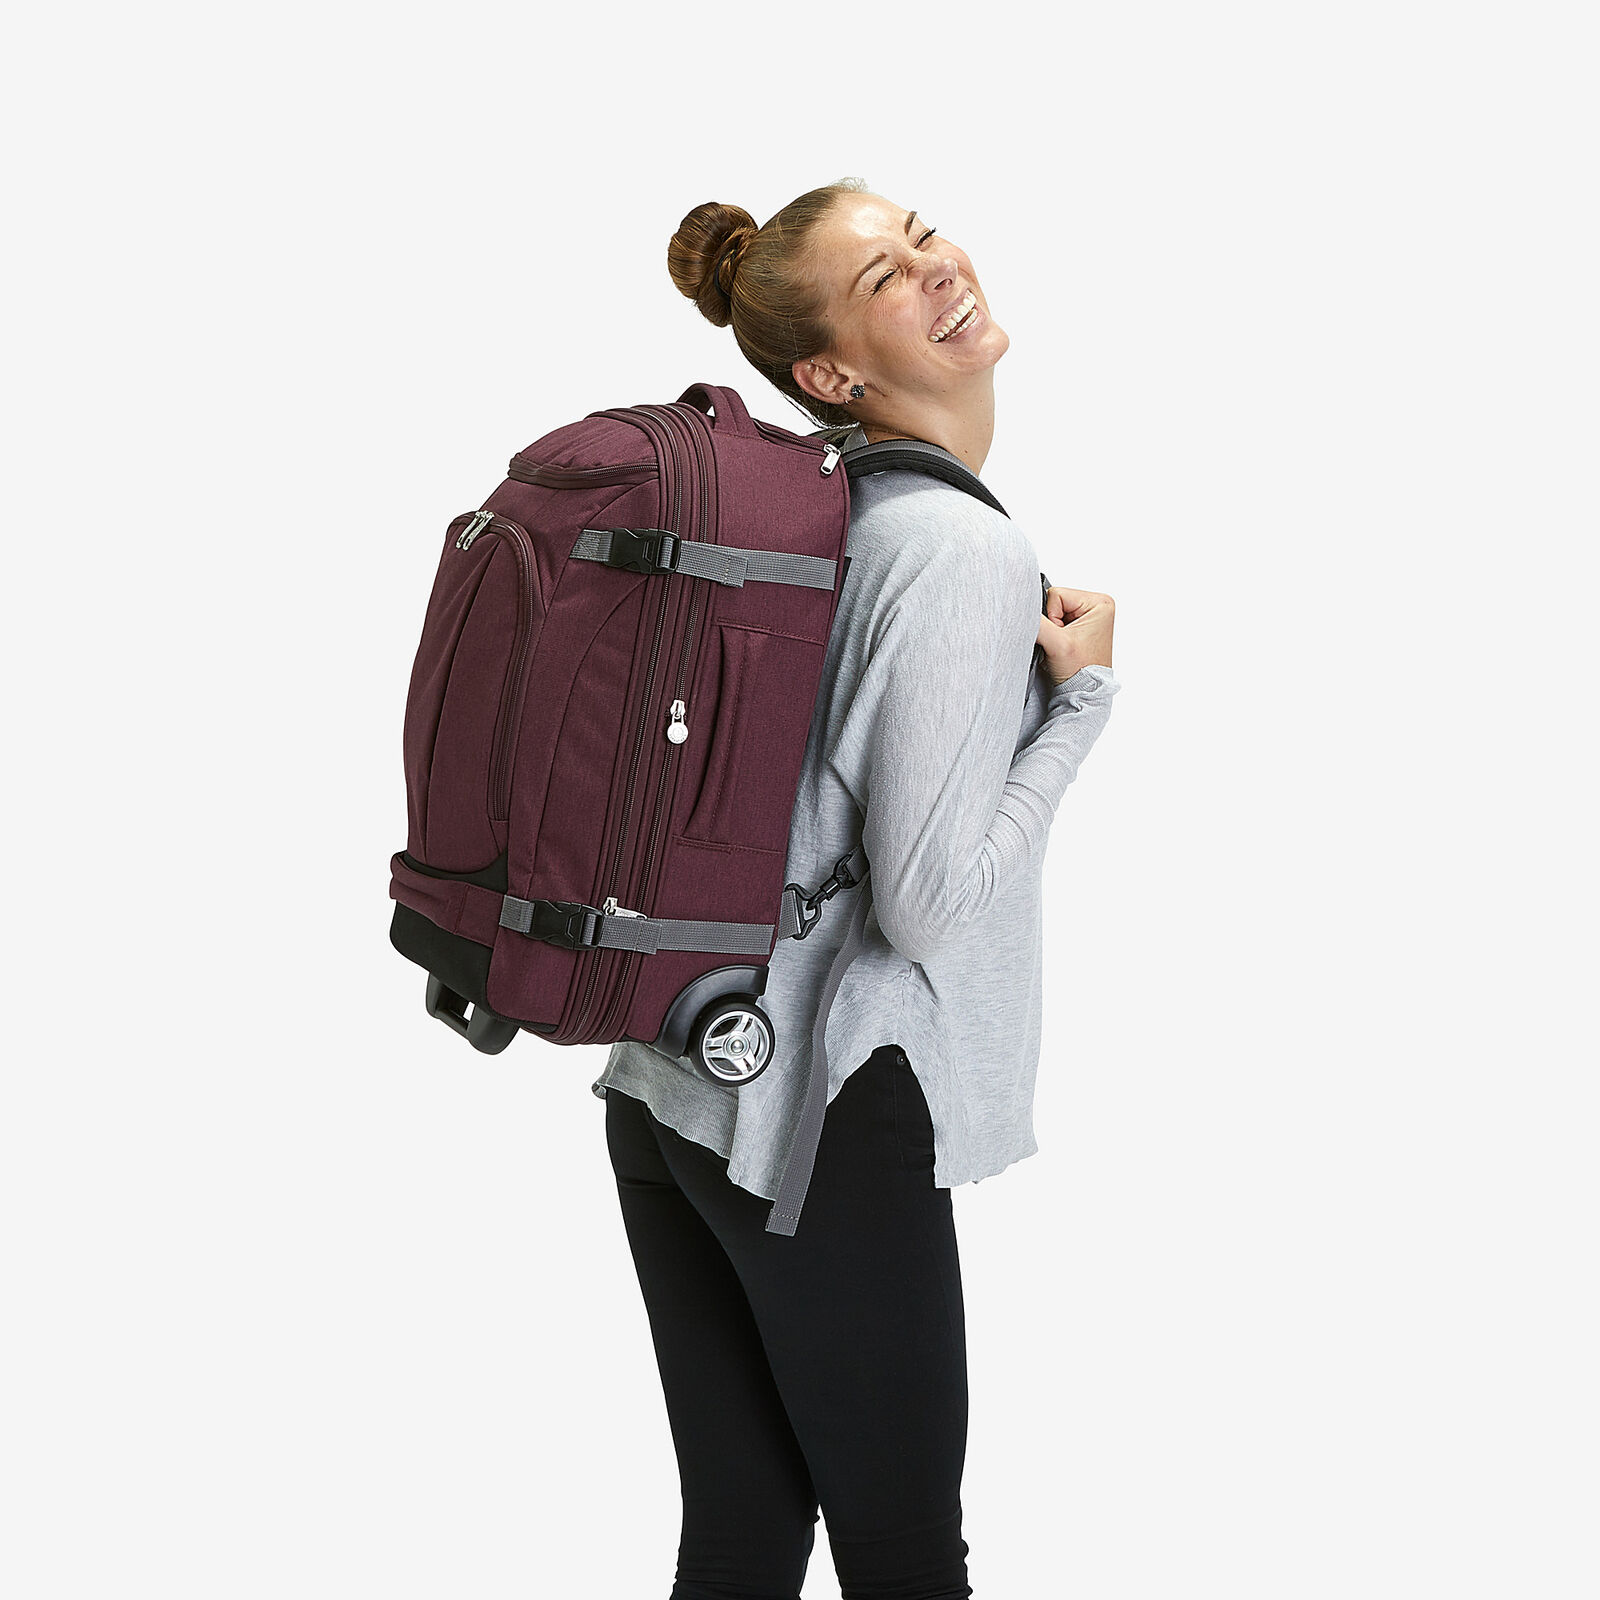 ebags Mother Lode Rolling Travel Backpack - Bags